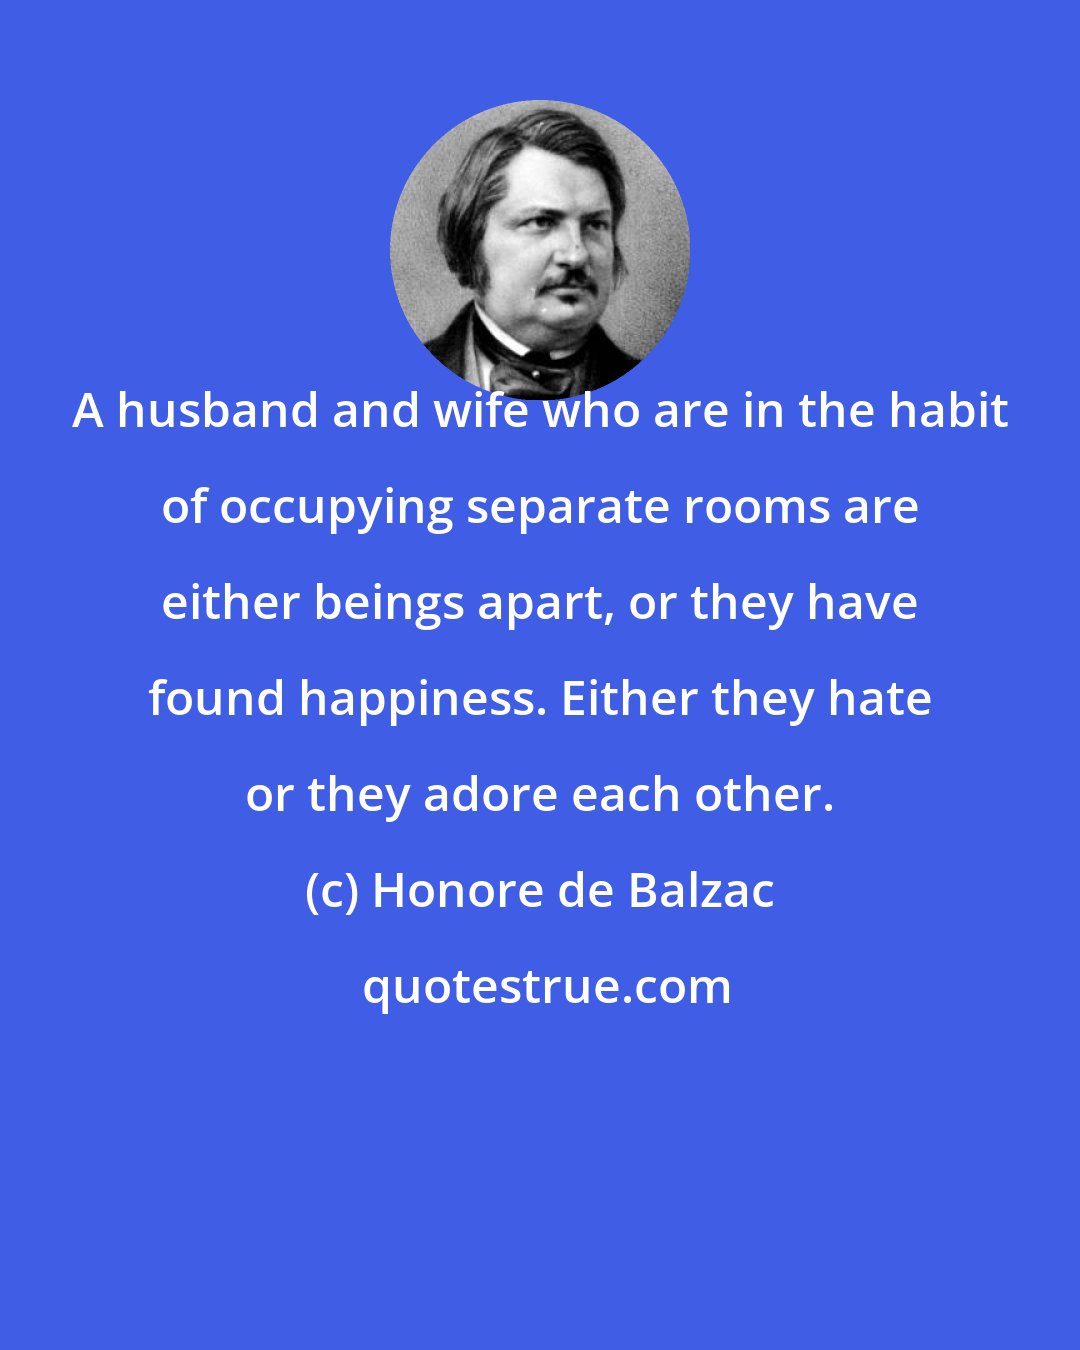 Honore de Balzac: A husband and wife who are in the habit of occupying separate rooms are either beings apart, or they have found happiness. Either they hate or they adore each other.